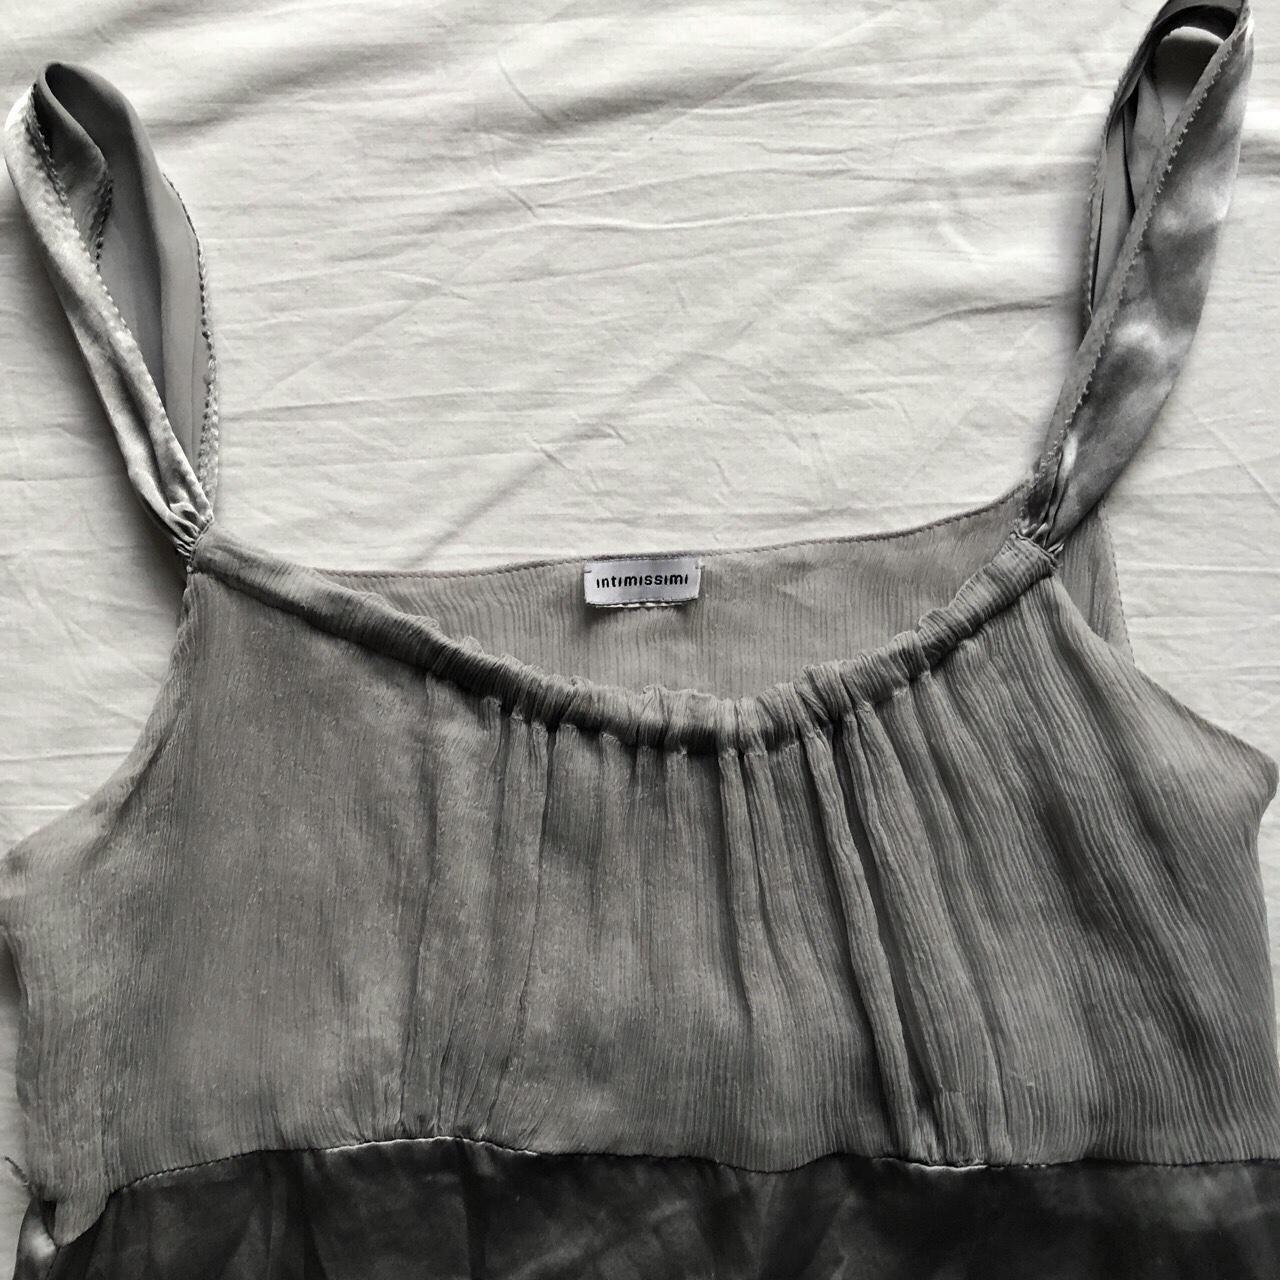 Product Image 2 - Intimissimi silver top

No size or